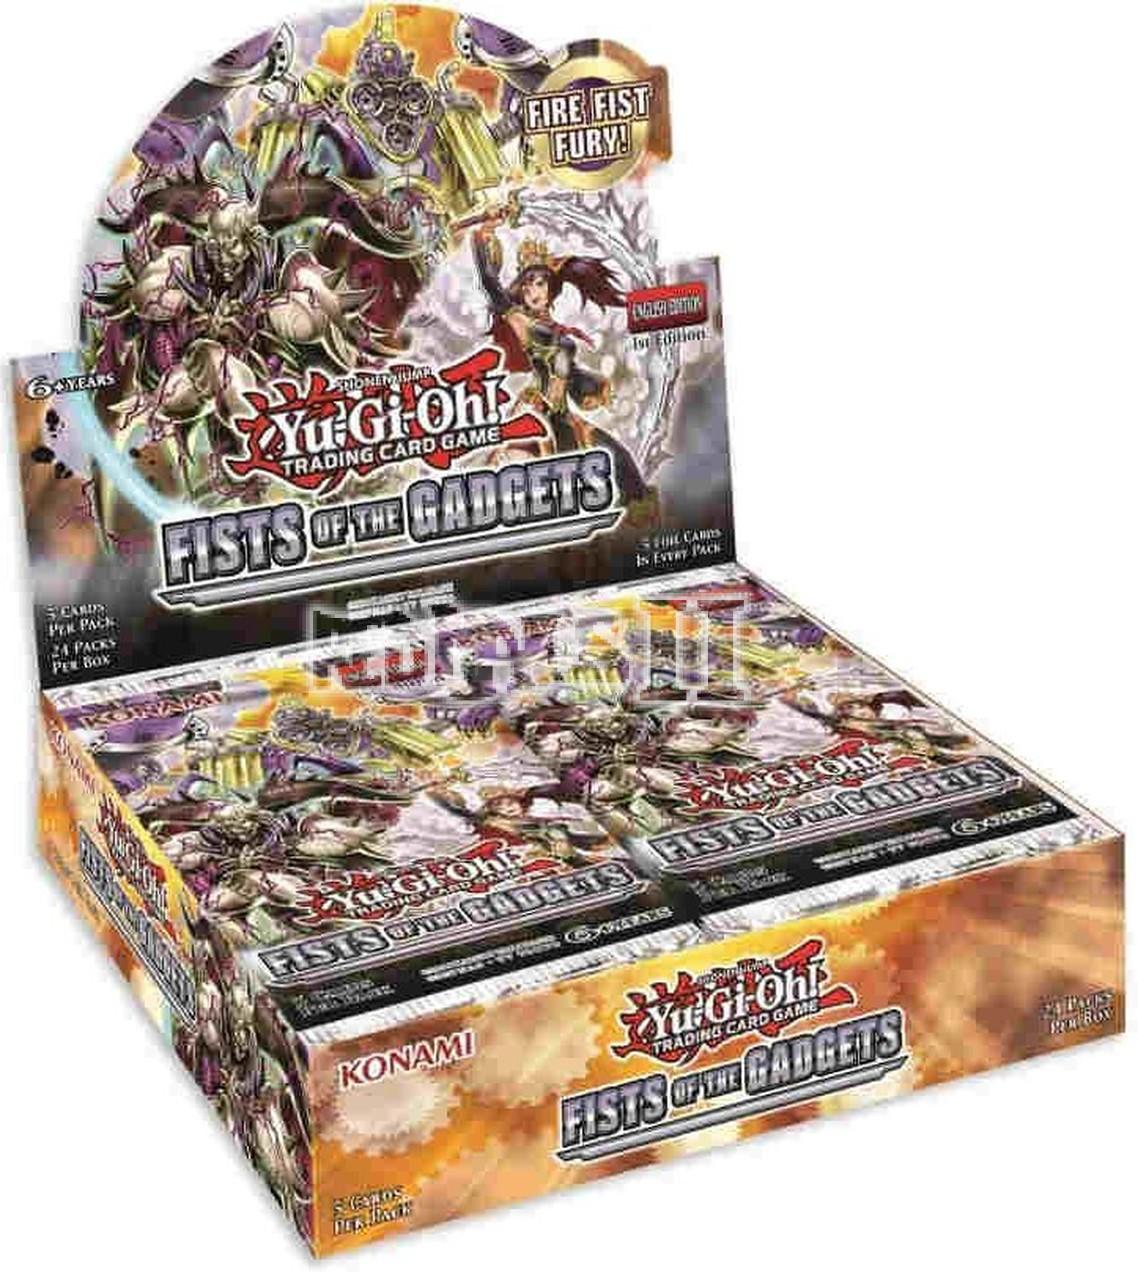 Yugioh Fists of the Gadgets Booster Box